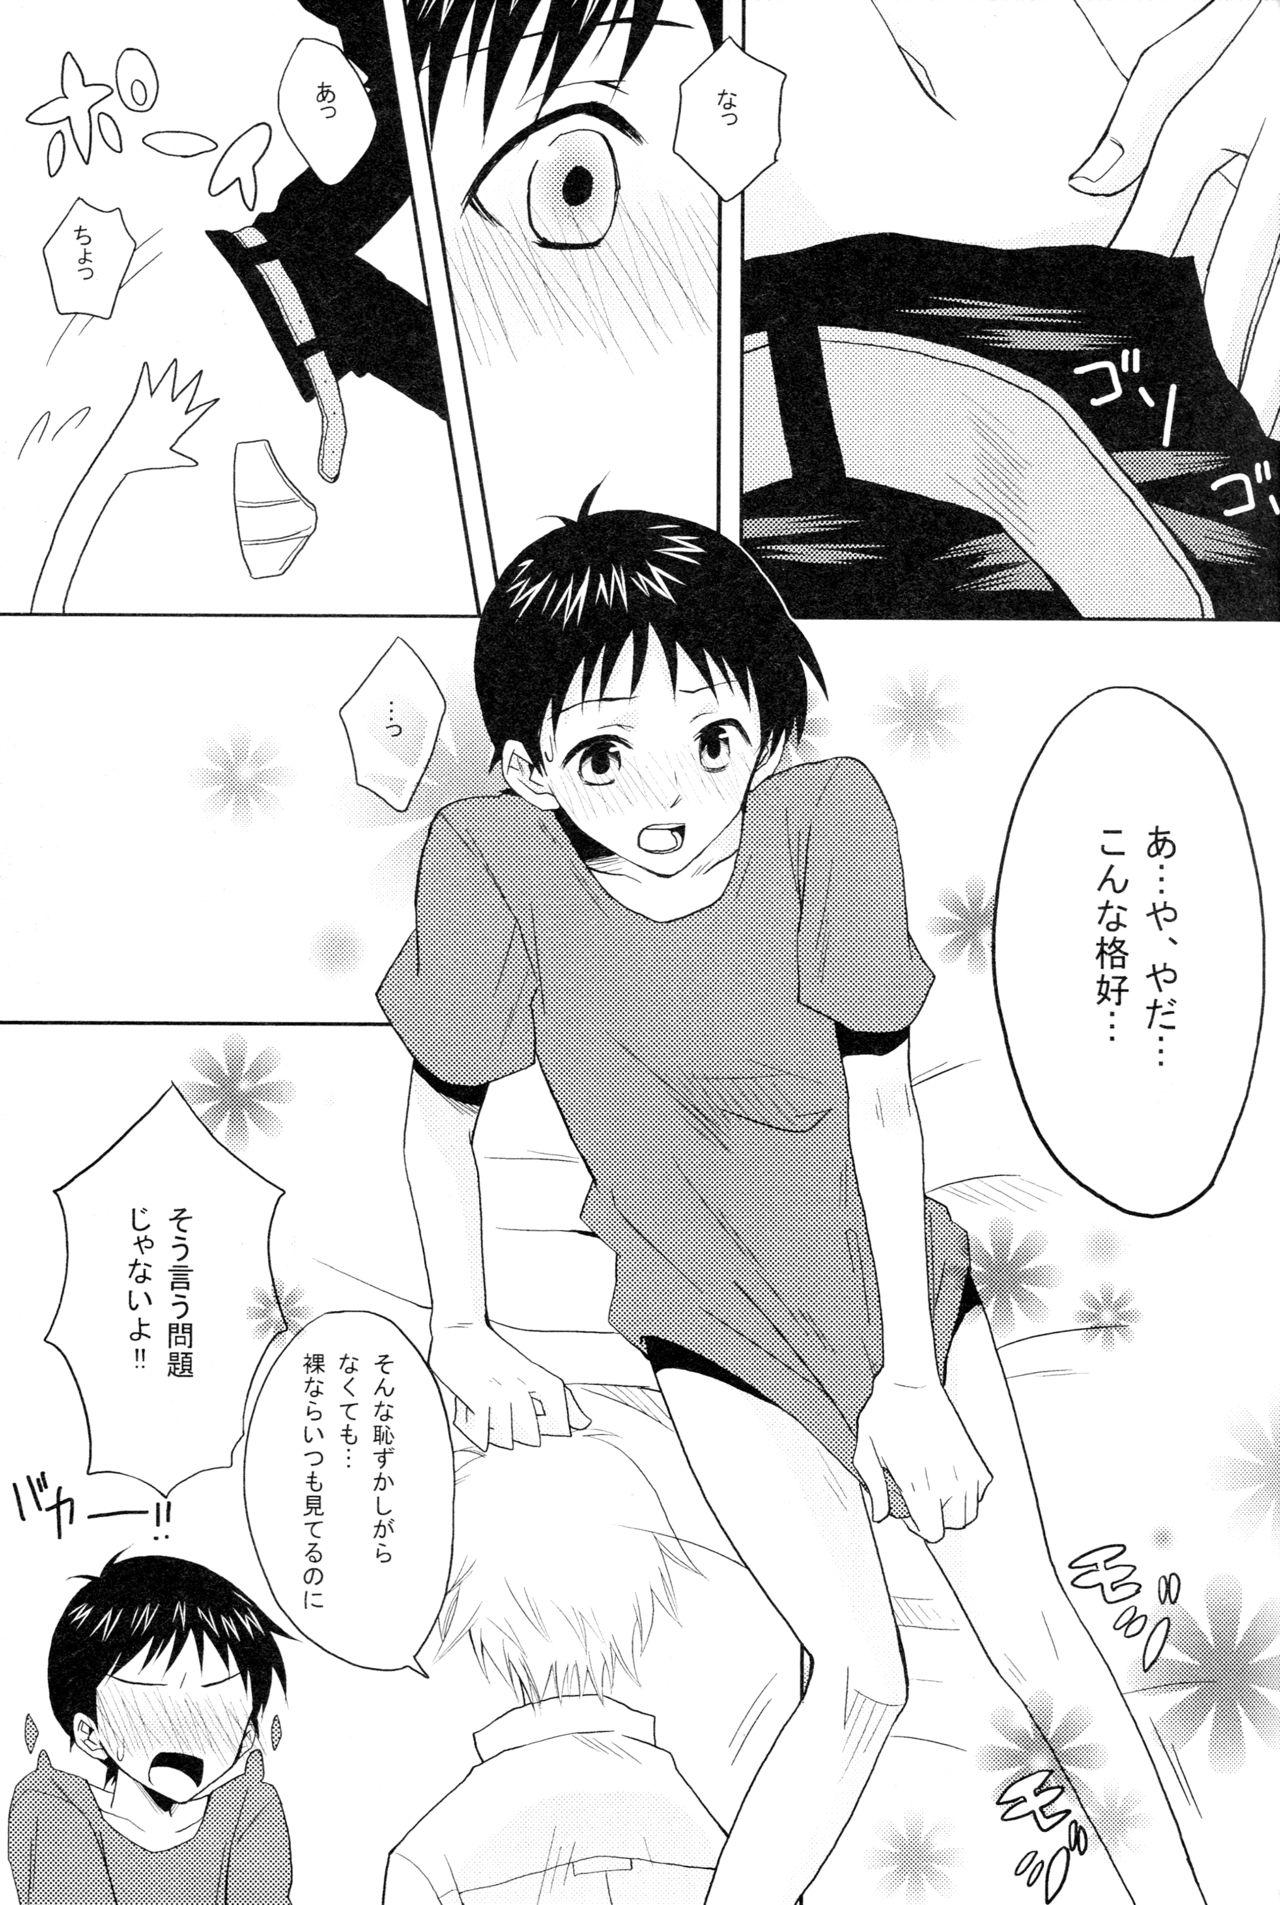 Fuck Pussy PSP Eva 2 no Susume - Neon genesis evangelion Hairy Pussy - Page 8